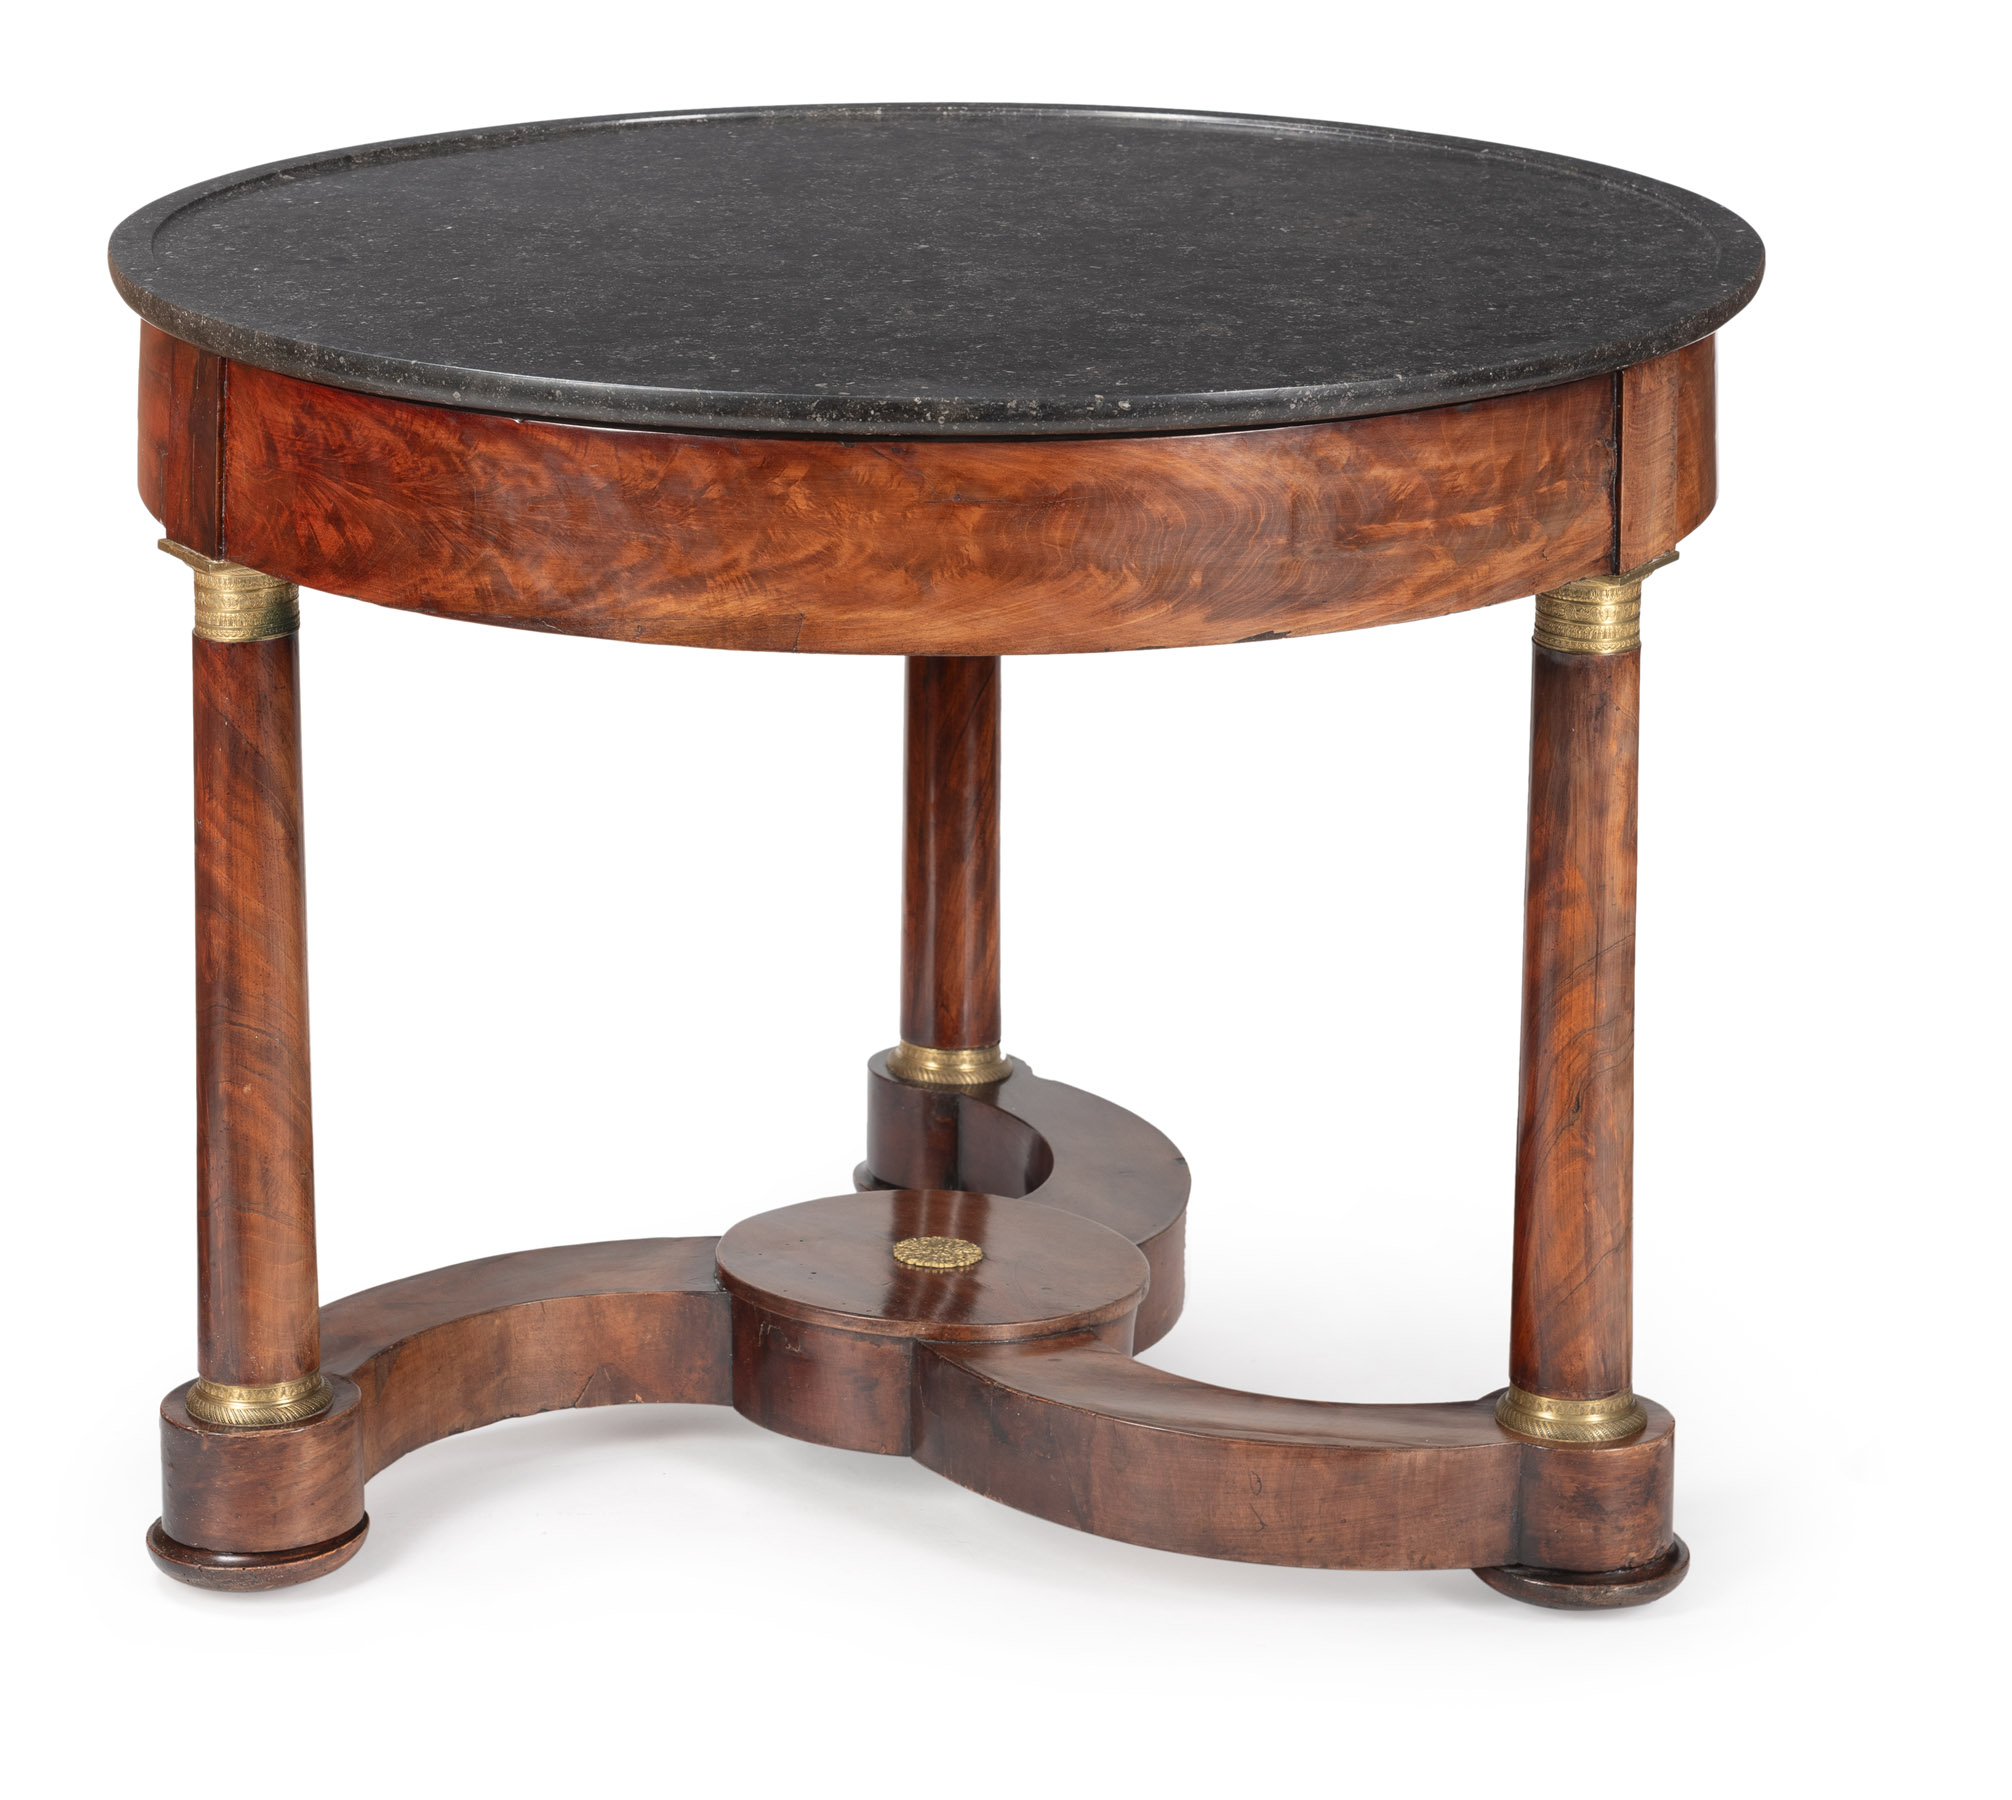 A FRENCH ORMOLU MOUNTED MAHOGANY CENTRE TABLE